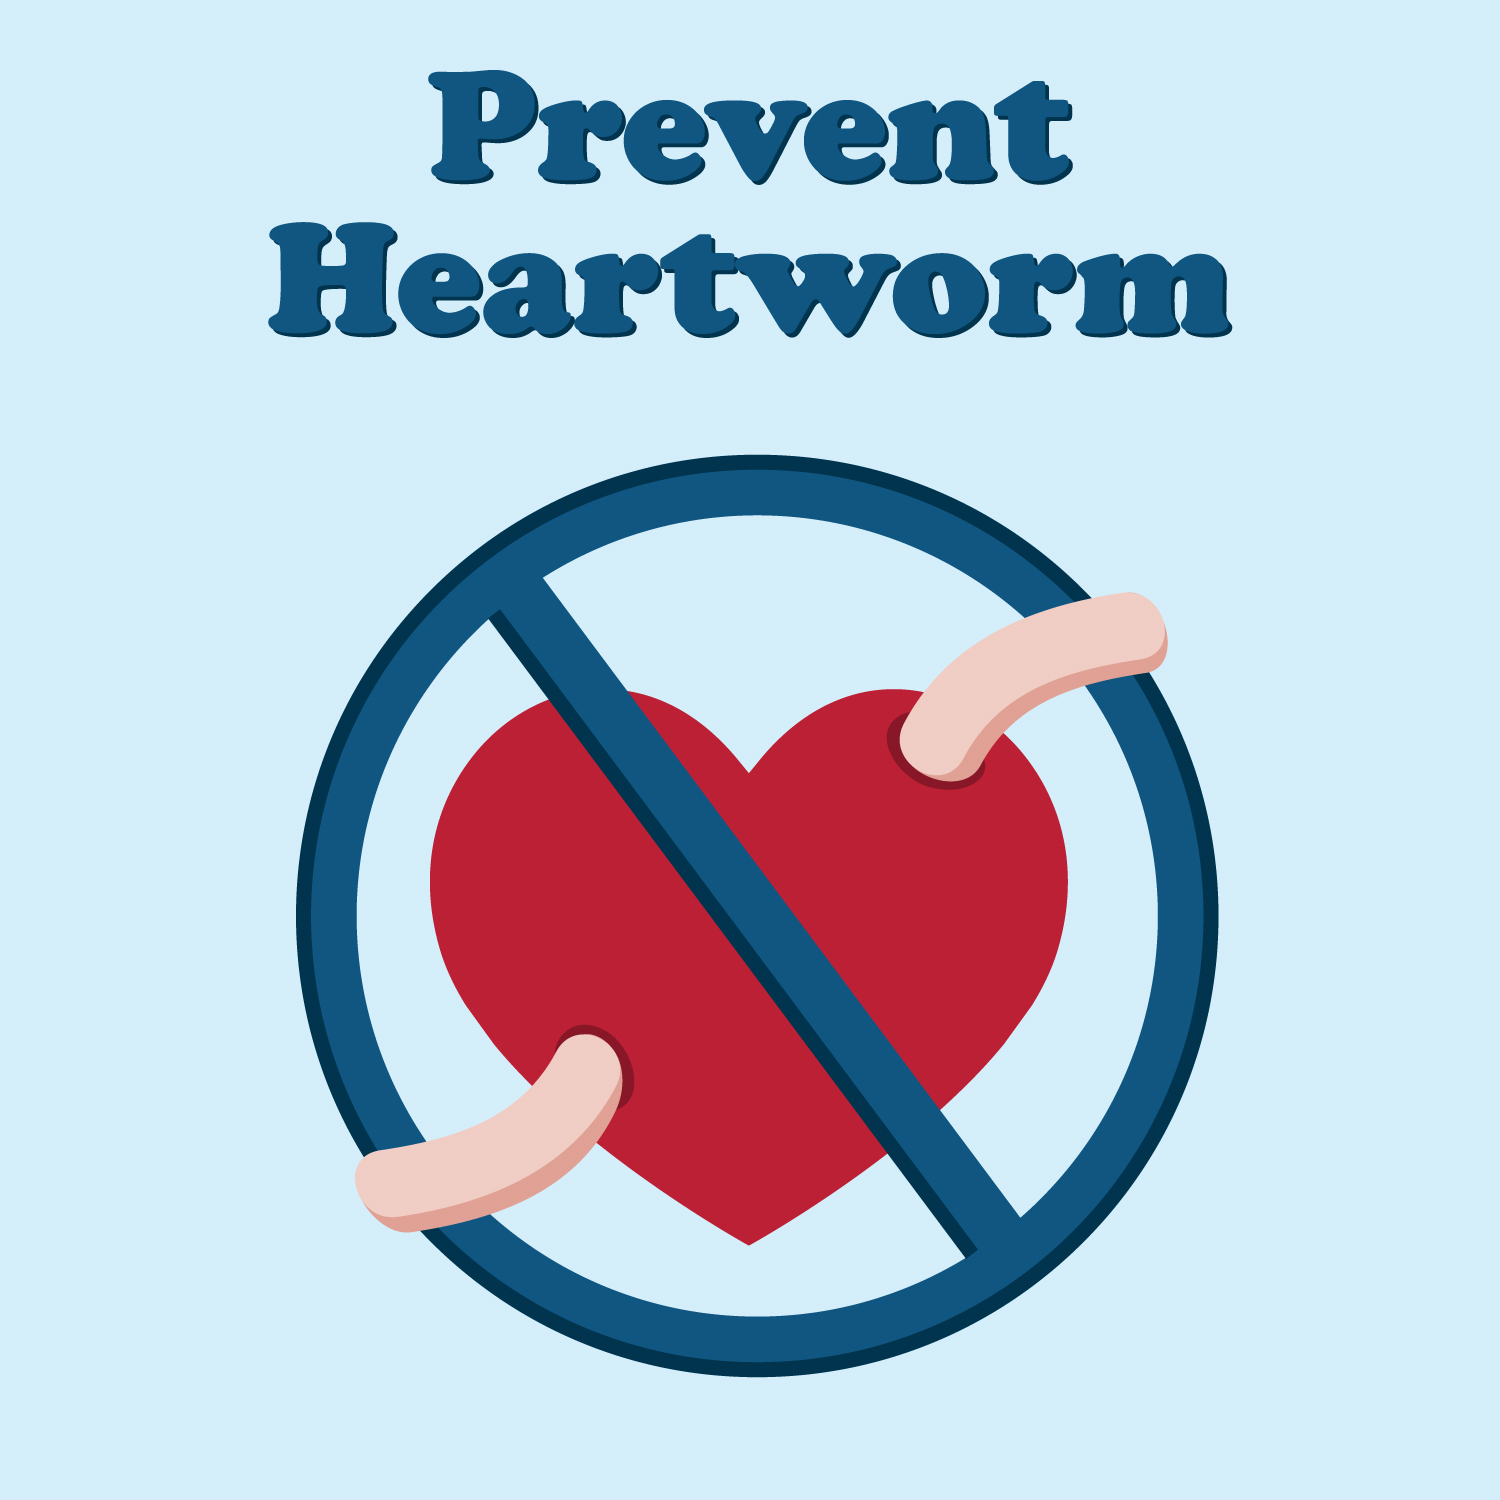 TVMA April is National Heartworm Awareness Month